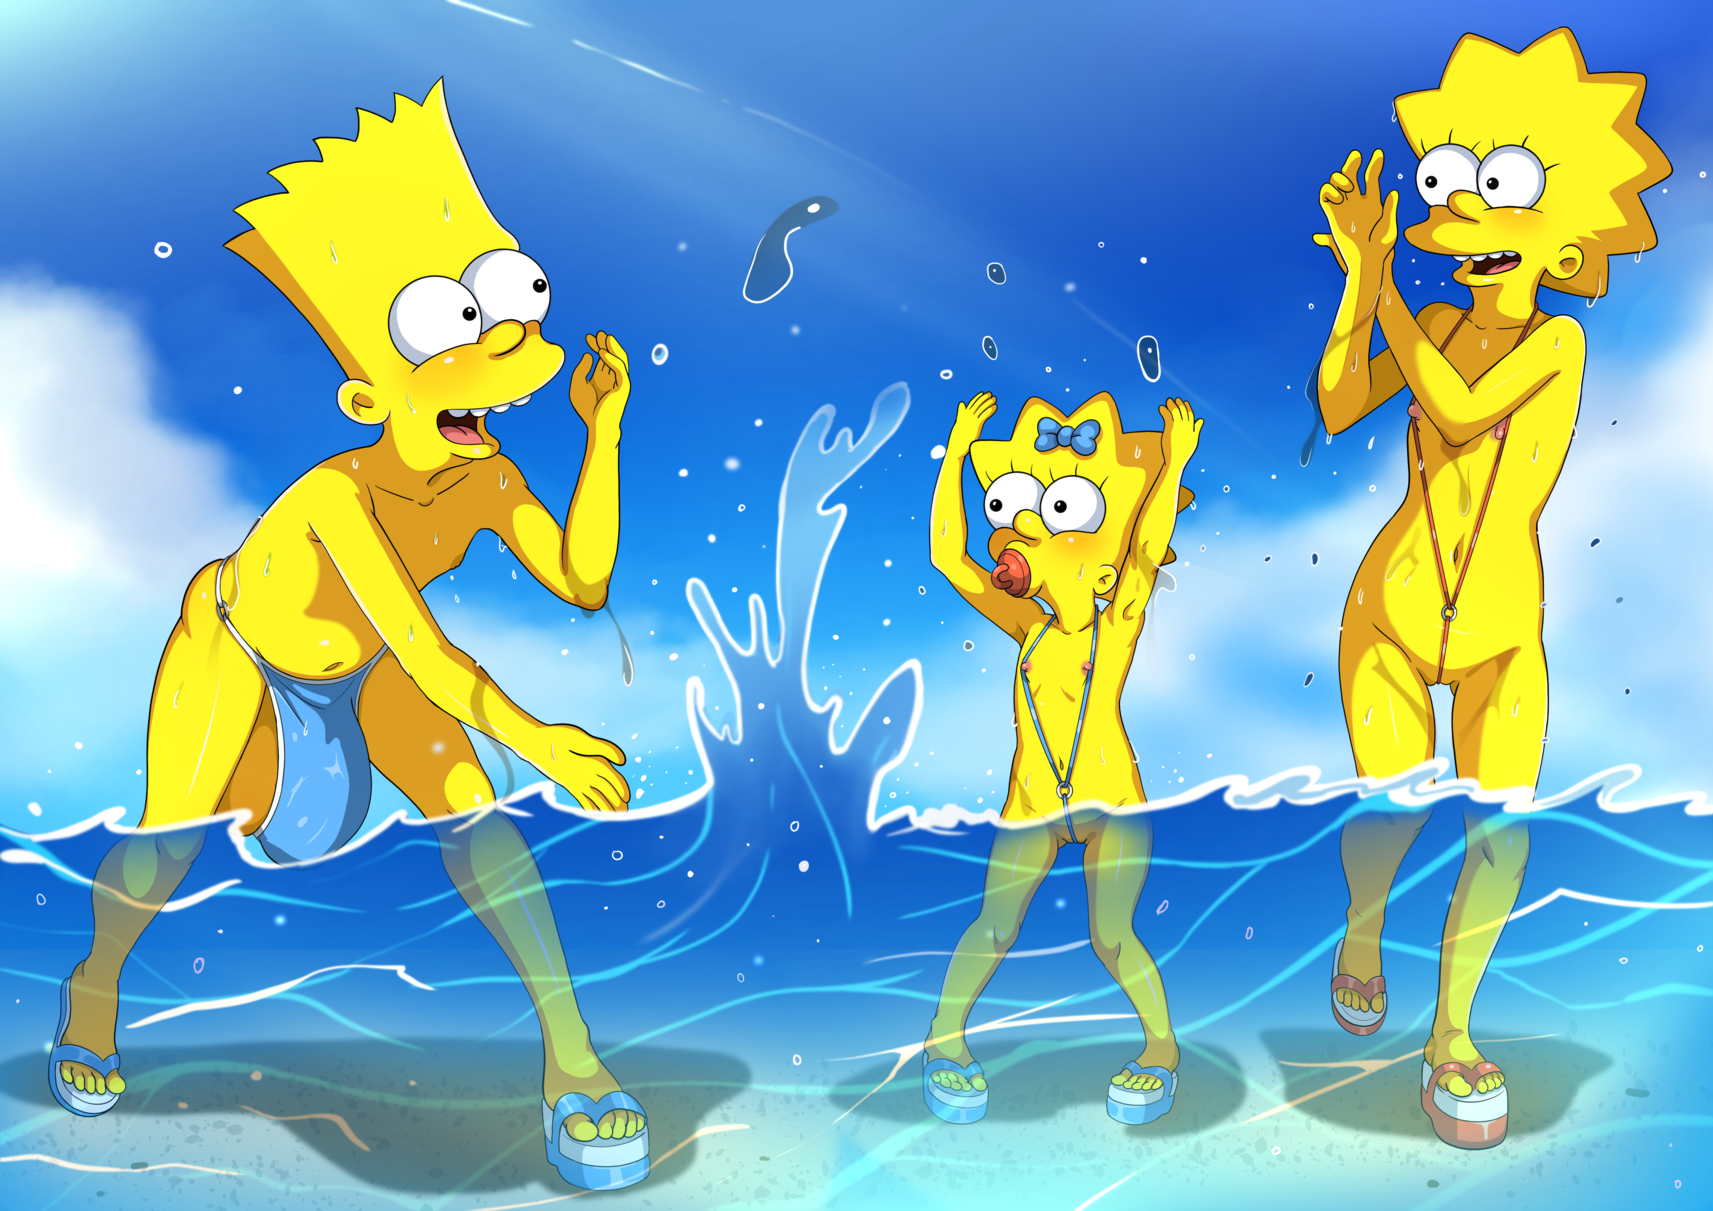 Attached: 2 images Bart, Lisa and Maggie at the beach, enjoying the sea. 